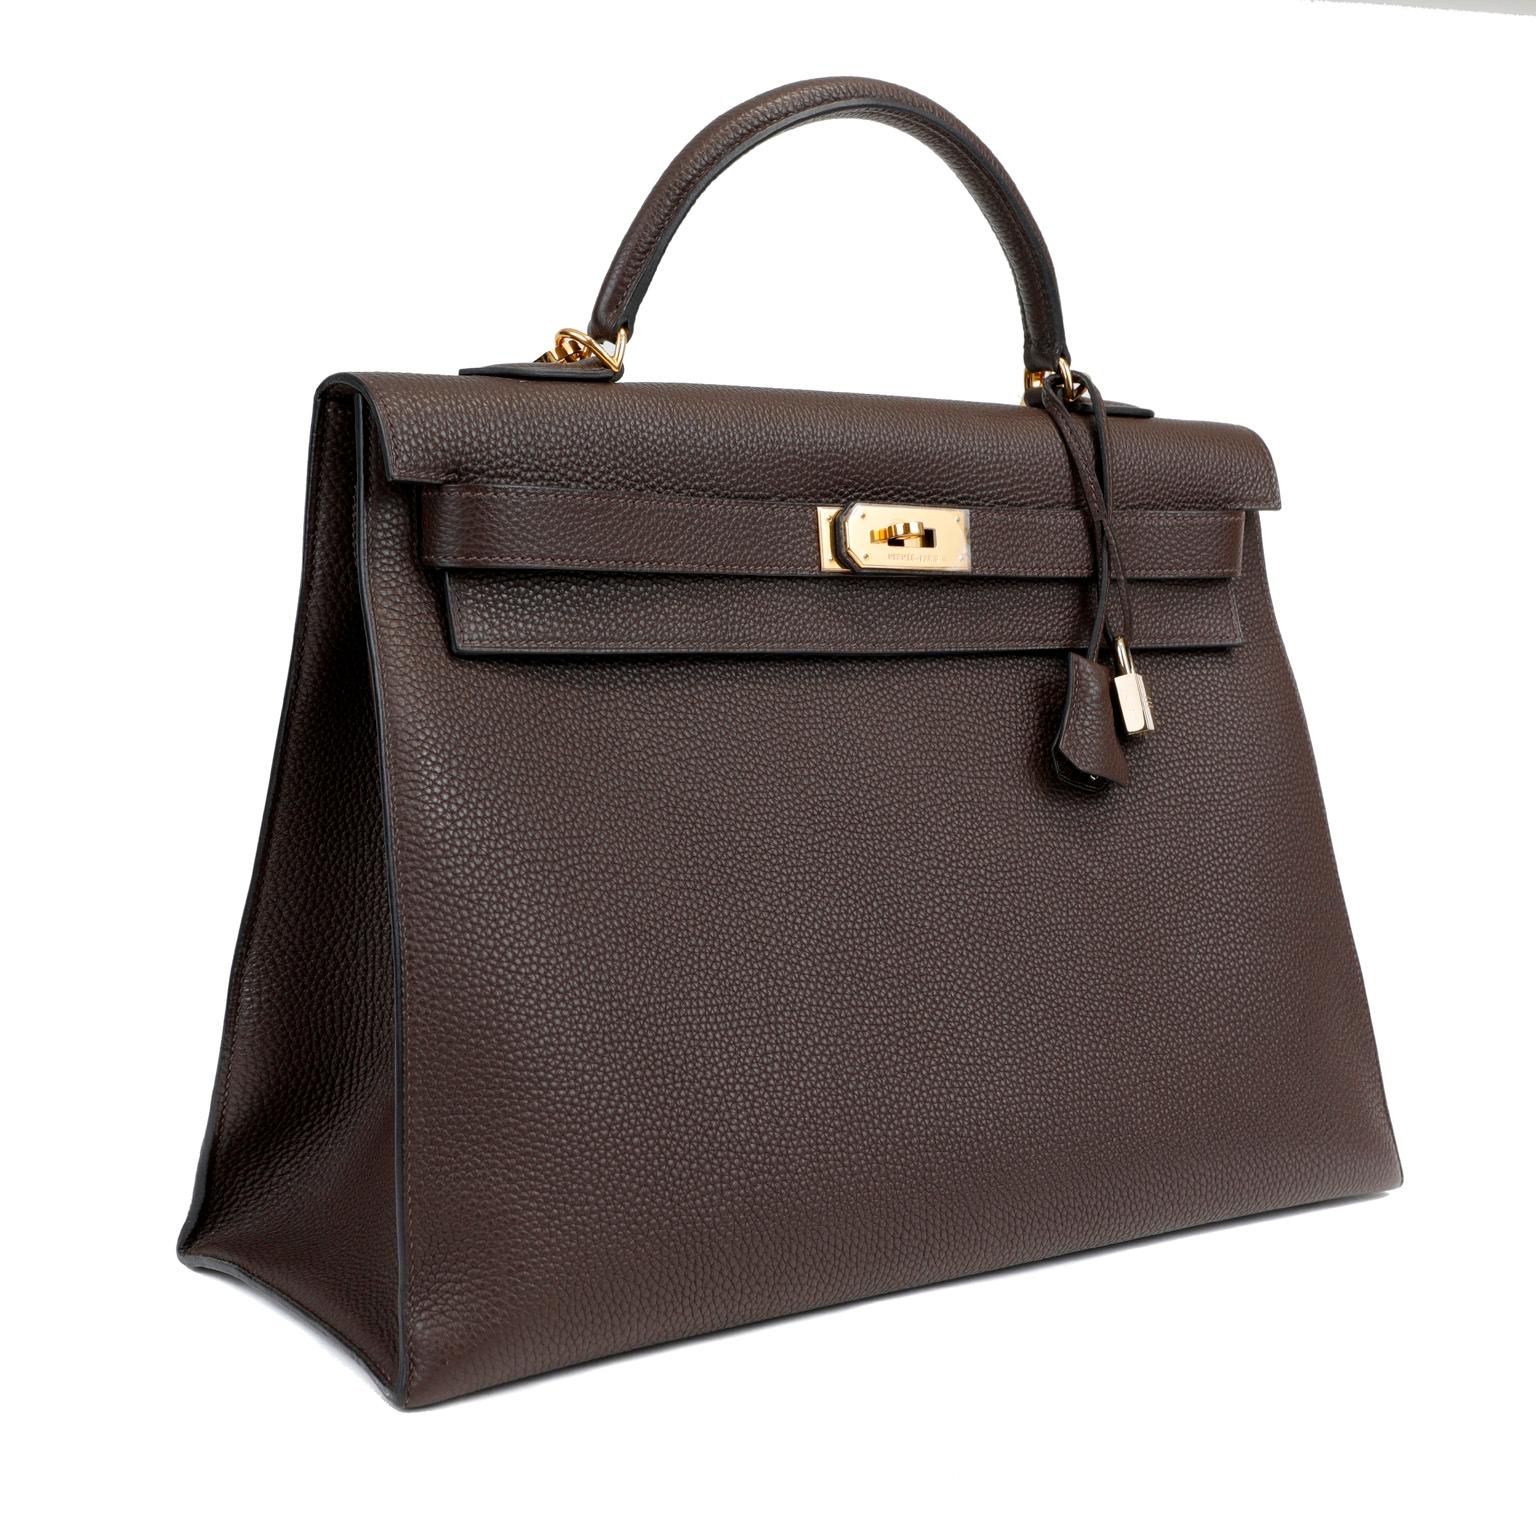 This authentic Hermès Espresso Brown Togo 40 cm Kelly is in pristine condition.  The protective plastic remains intact on the hardware.   Hermès bags are considered the ultimate luxury item worldwide.  Each piece is handcrafted with waitlists that